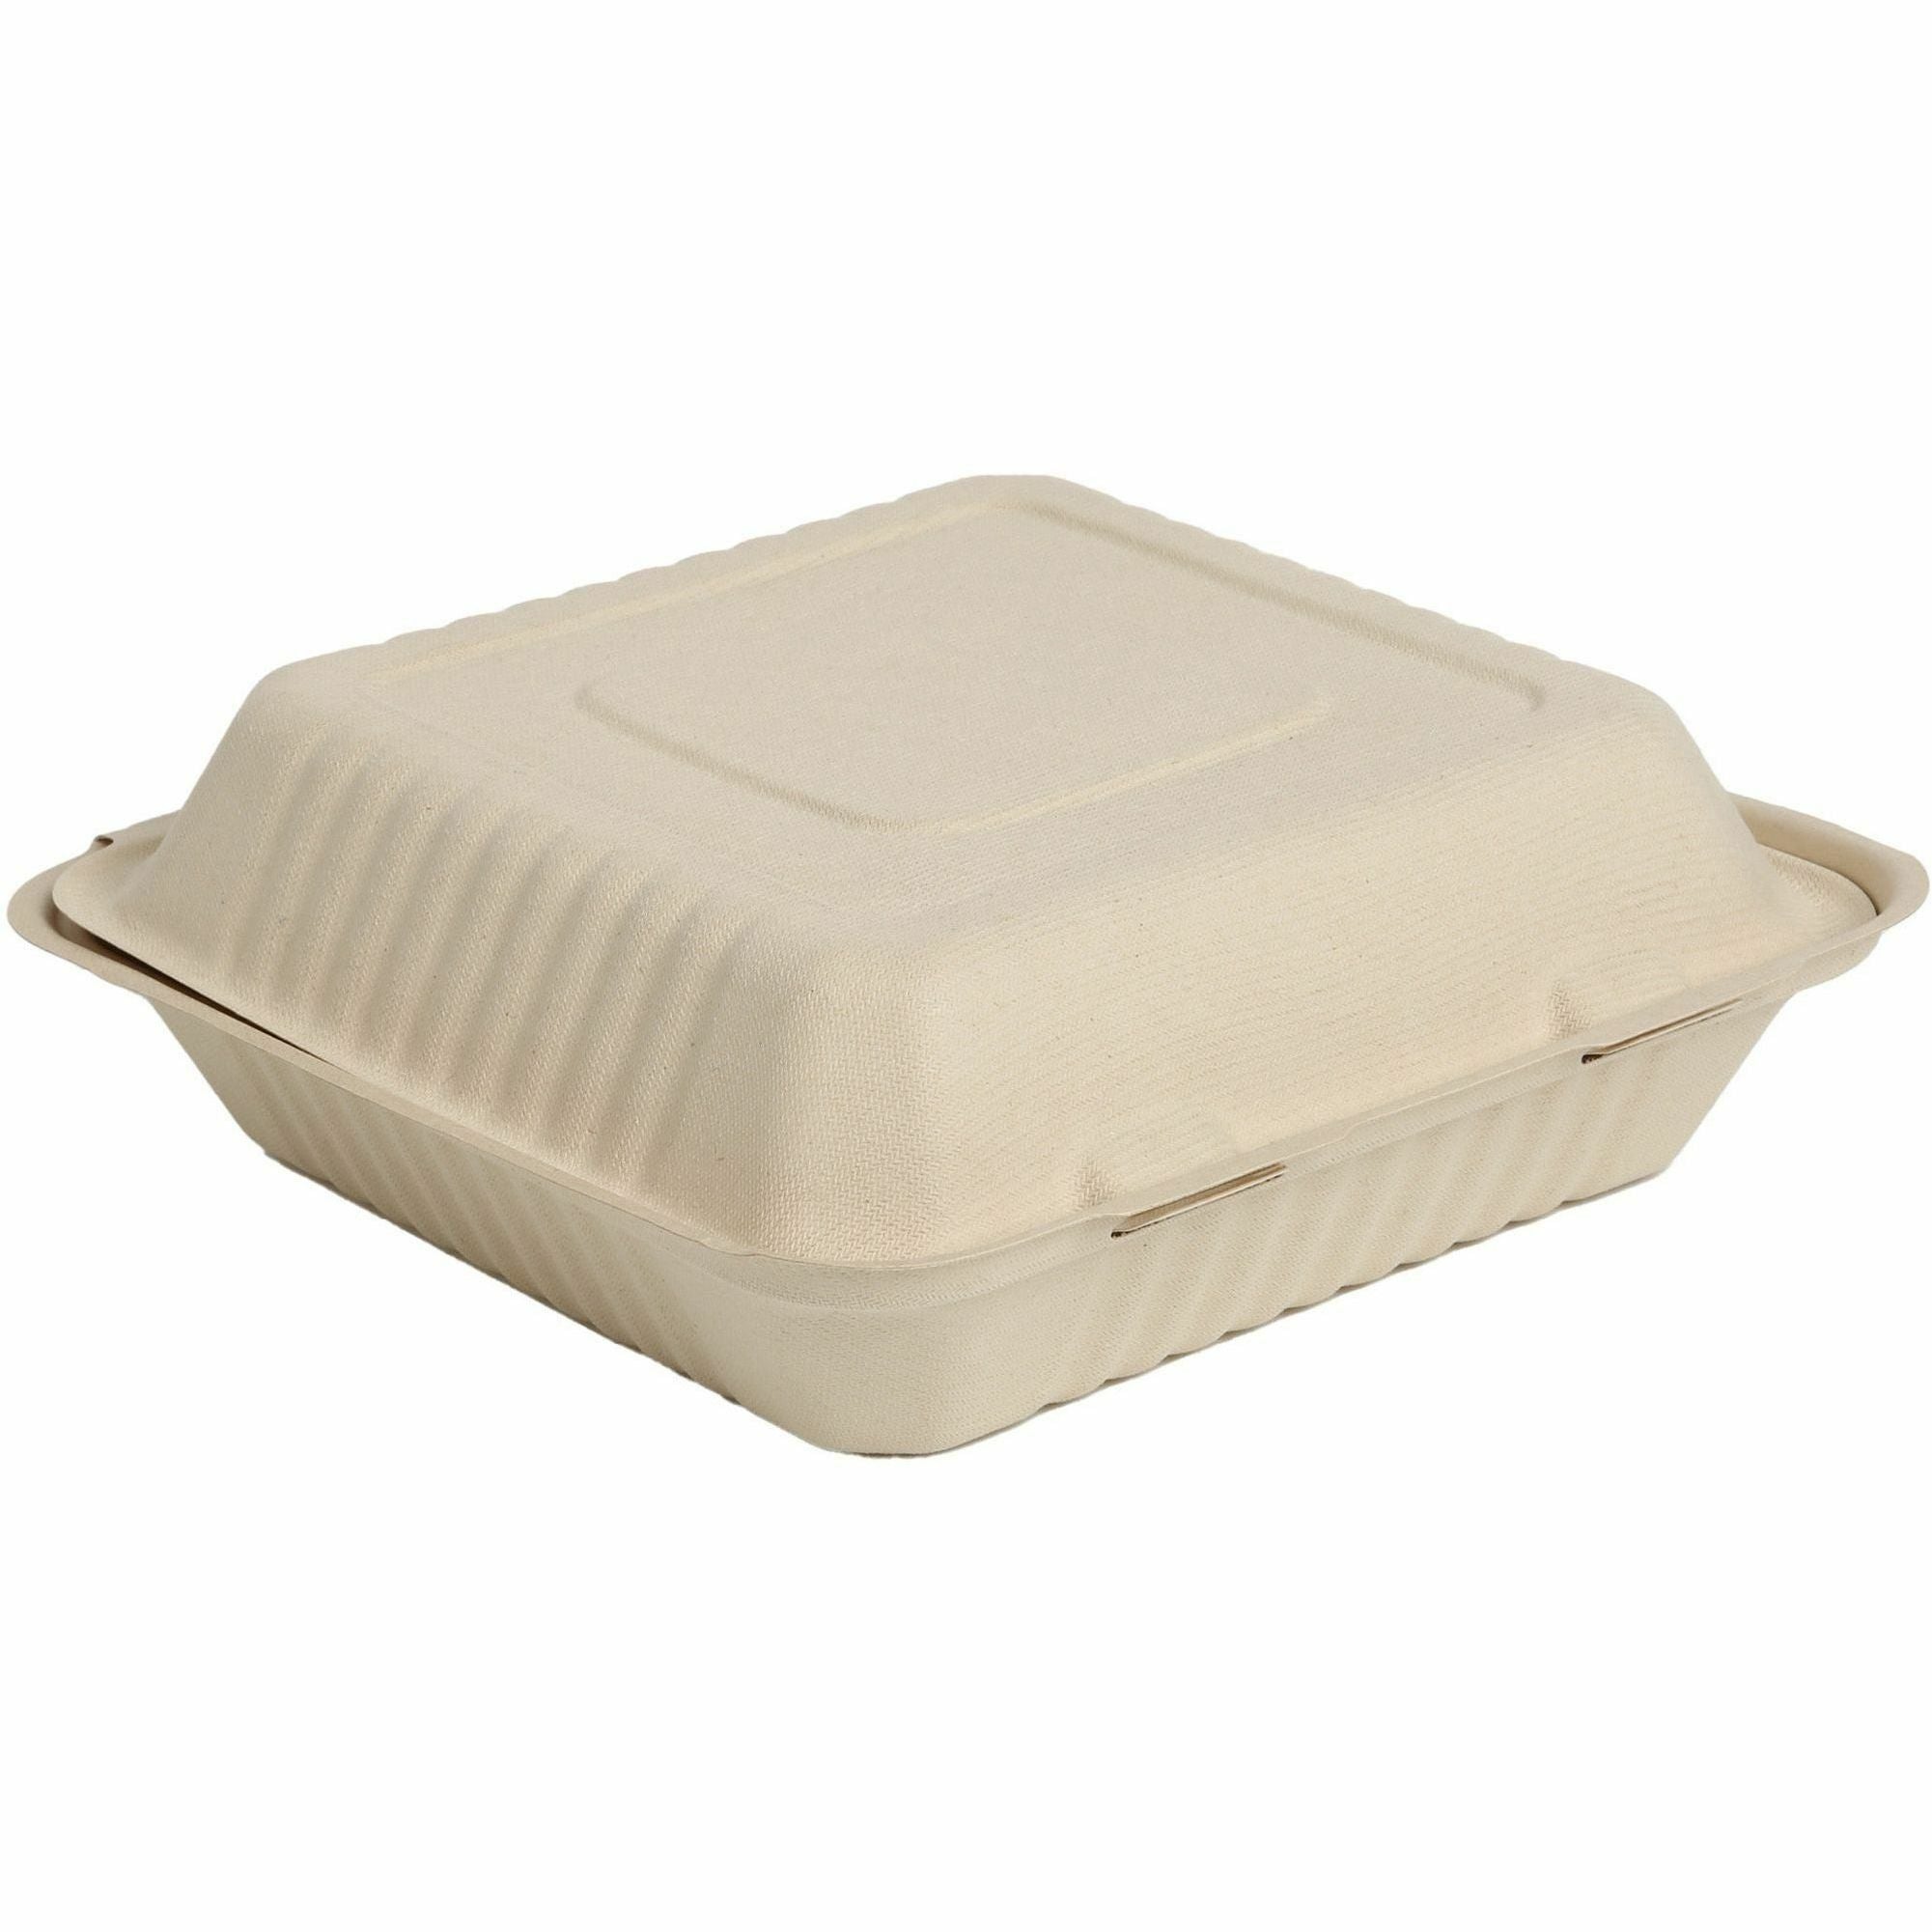 blutable-40-oz-portable-clamshell-containers-food-storage-food-natural-molded-fiber-sugarcane-fiber-body-200-carton_rmlmfhc91c - 2